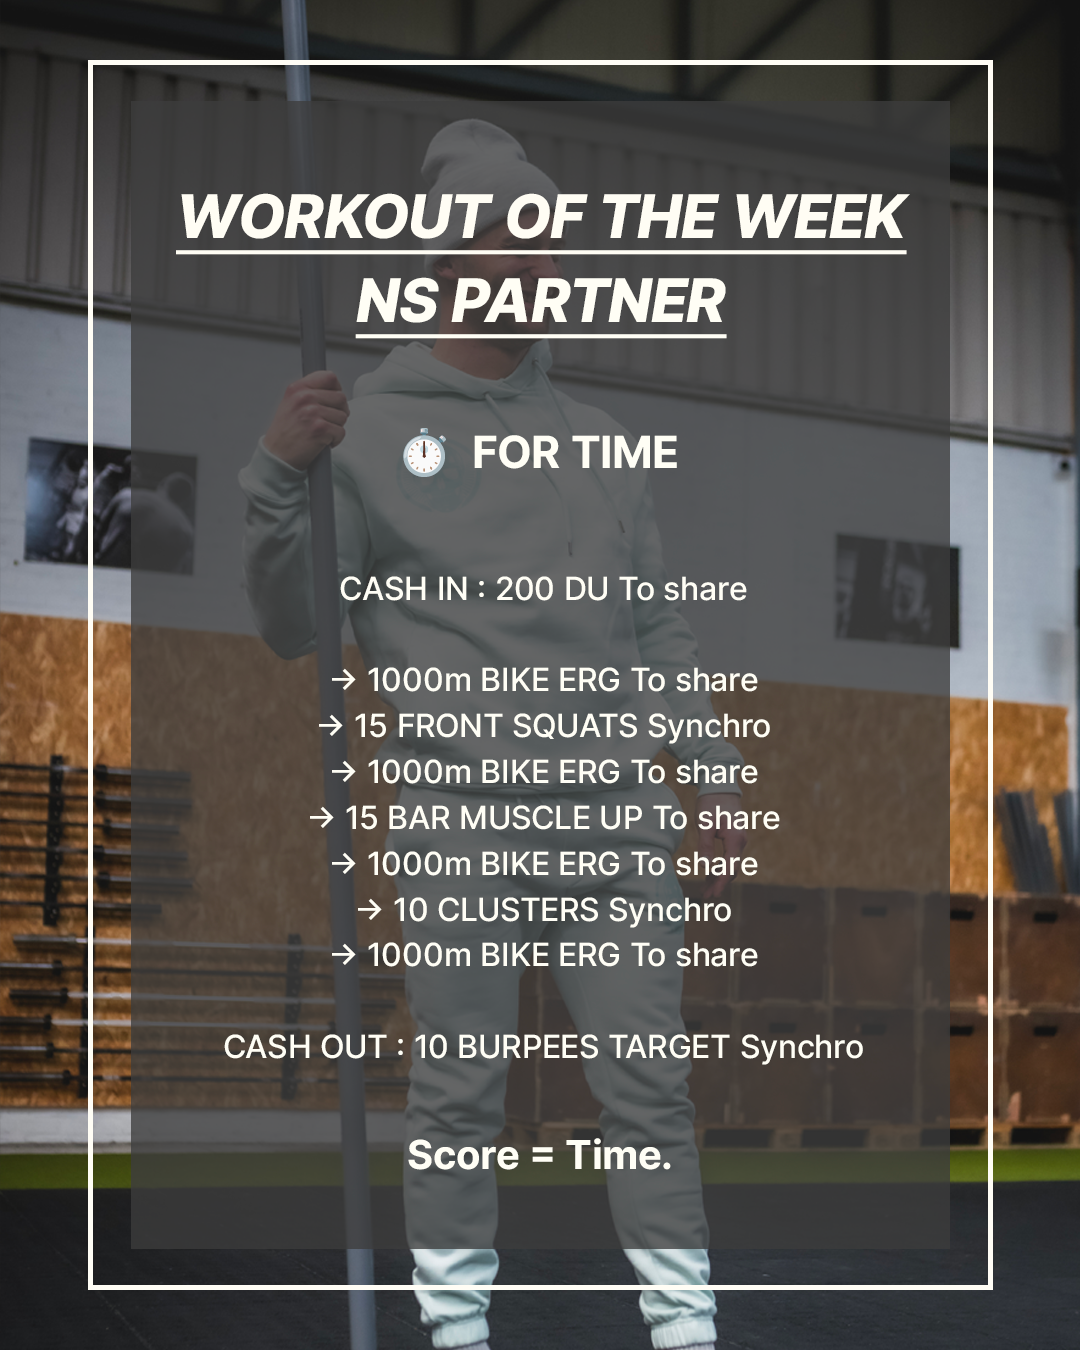 NS PARTNER WORKOUT  OF THE WEEK :chronomètre: FOR TIME => CASH IN : 200 DU To share • 1000m BIKE ERG To share • 15 FRONT SQUATS Synchro • 1000m BIKE ERG To share • 15 BAR MUSCLE UP To share • 1000m BIKE ERG To share • 10 CLUSTERS Synchro • 1000m BIKE ERG To share => CASH OUT : 10 BURPEES TARGET Synchro Score = Time.